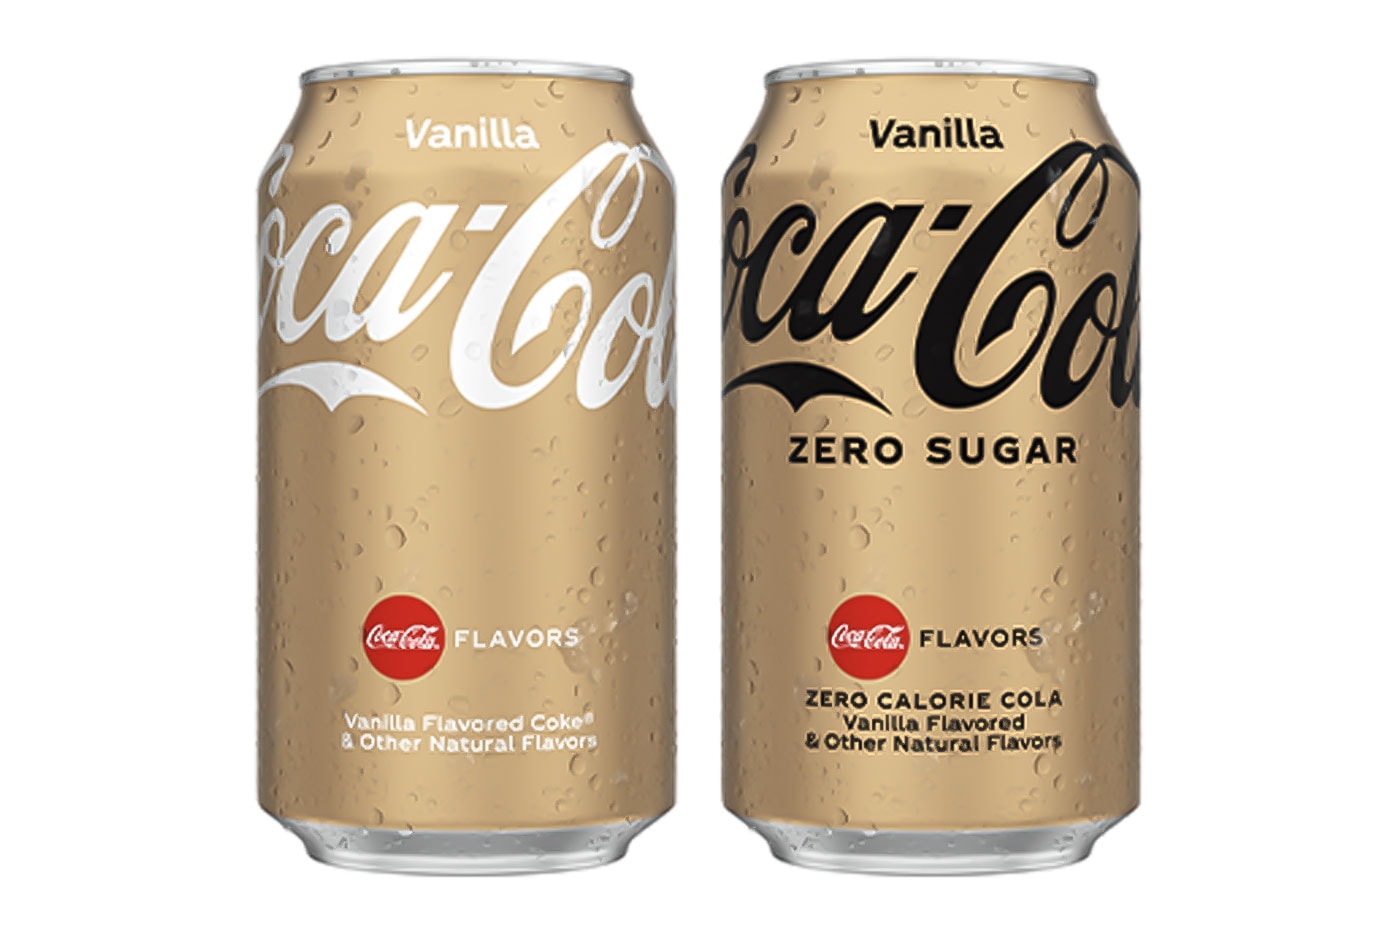 Coca-Cola Gets a Caffeine Update With New Flavor Coffee Mocha Flavor